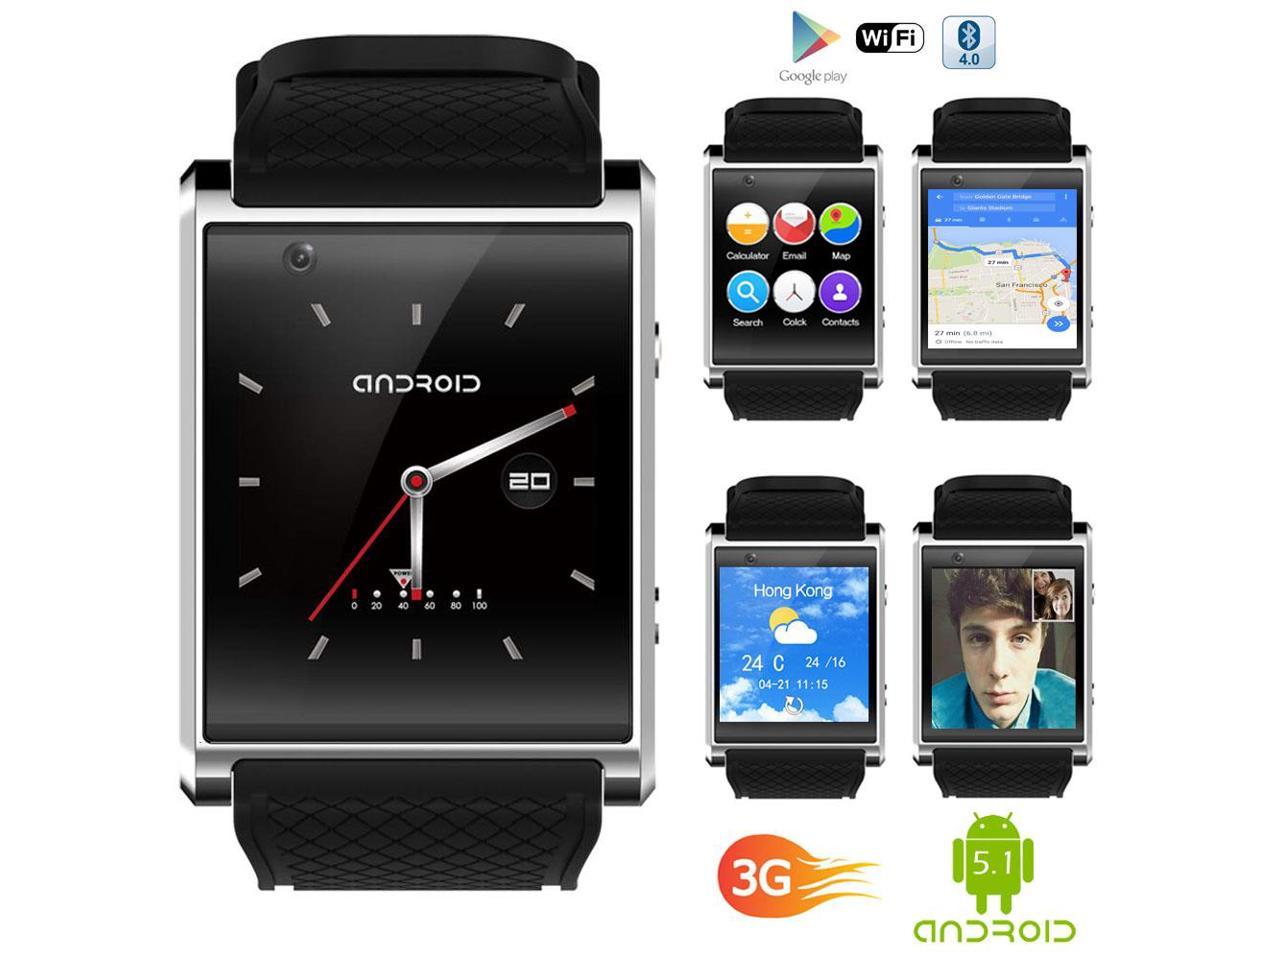 NEW 2018 Android 5.1 SmartWatch - 1.54